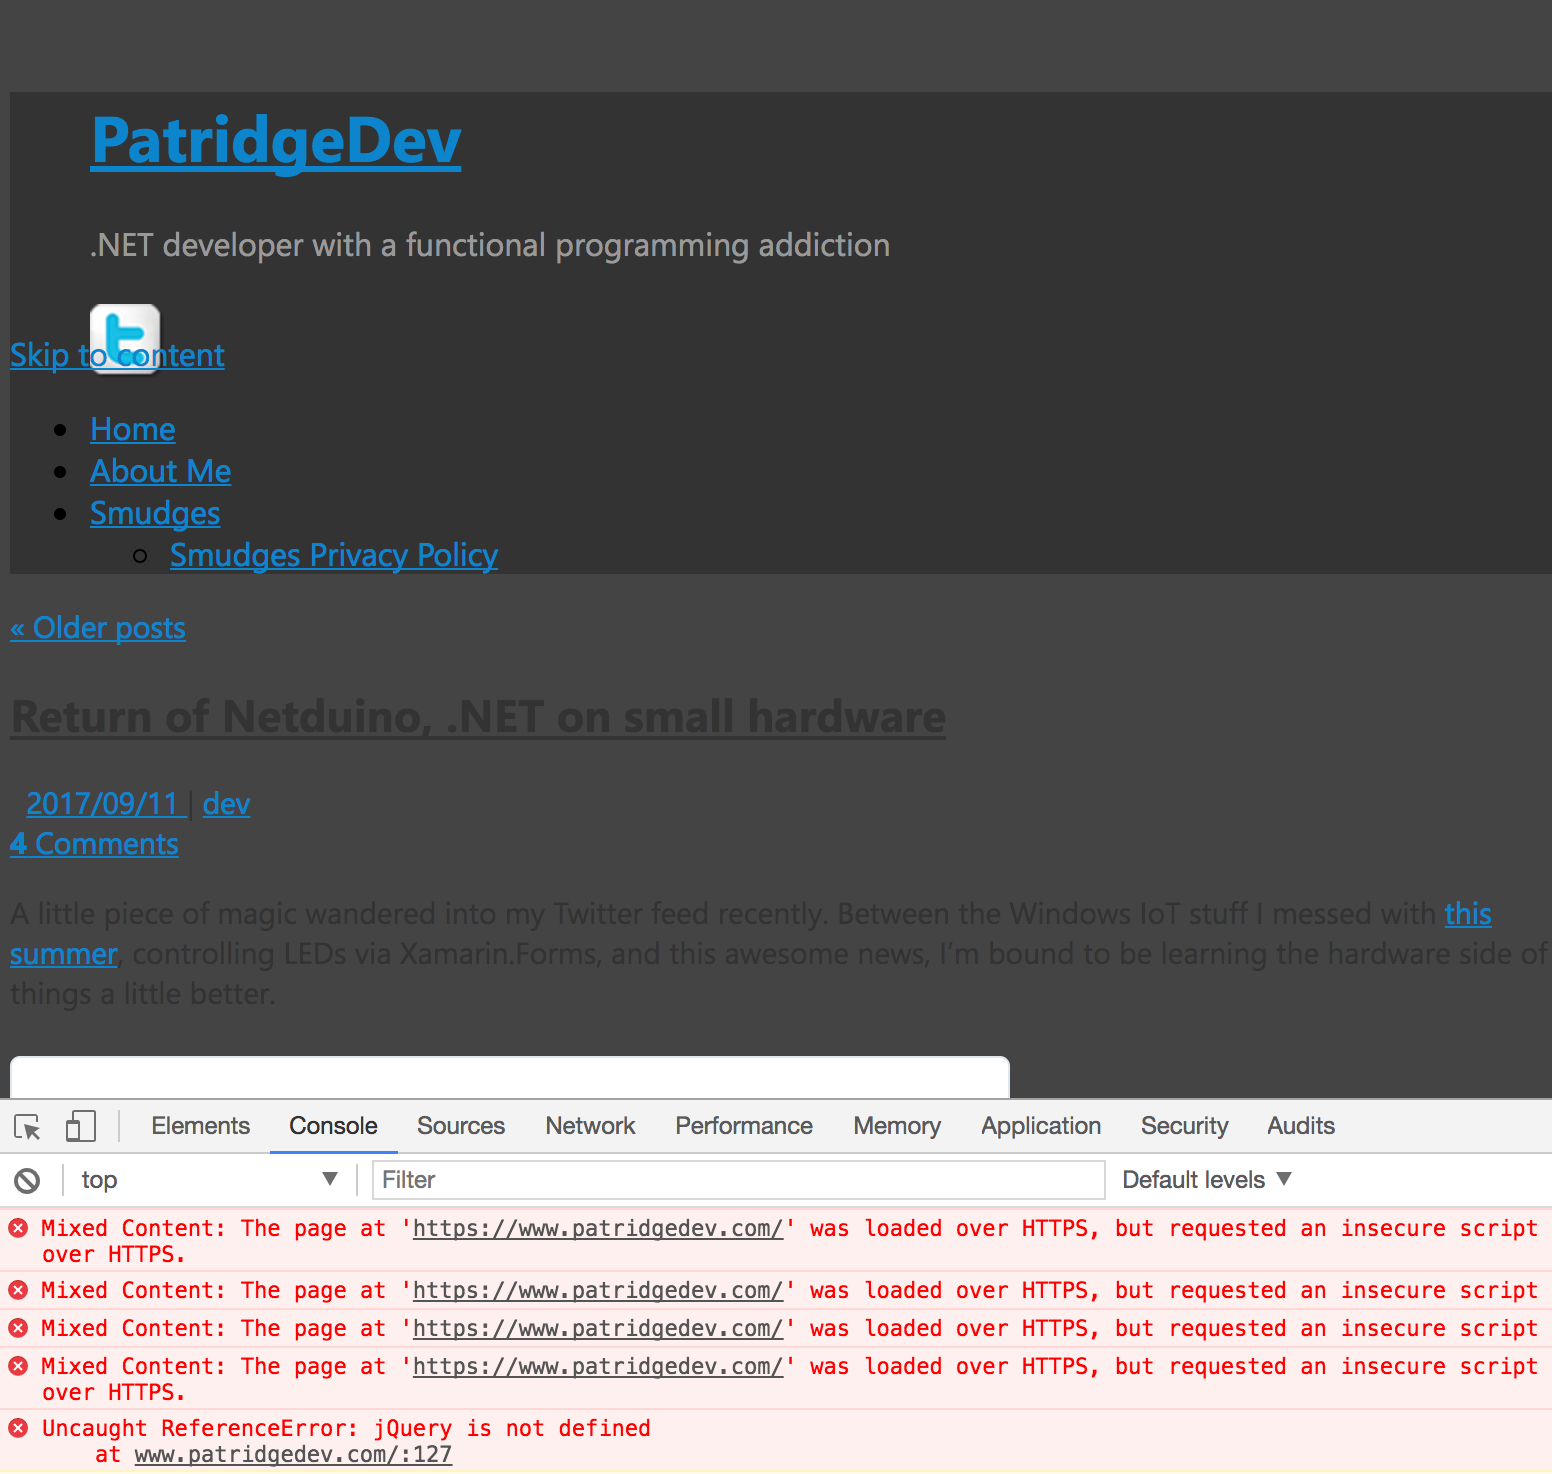 patridgedev.com with several mixed-security broken things making it render horribly in most browsers